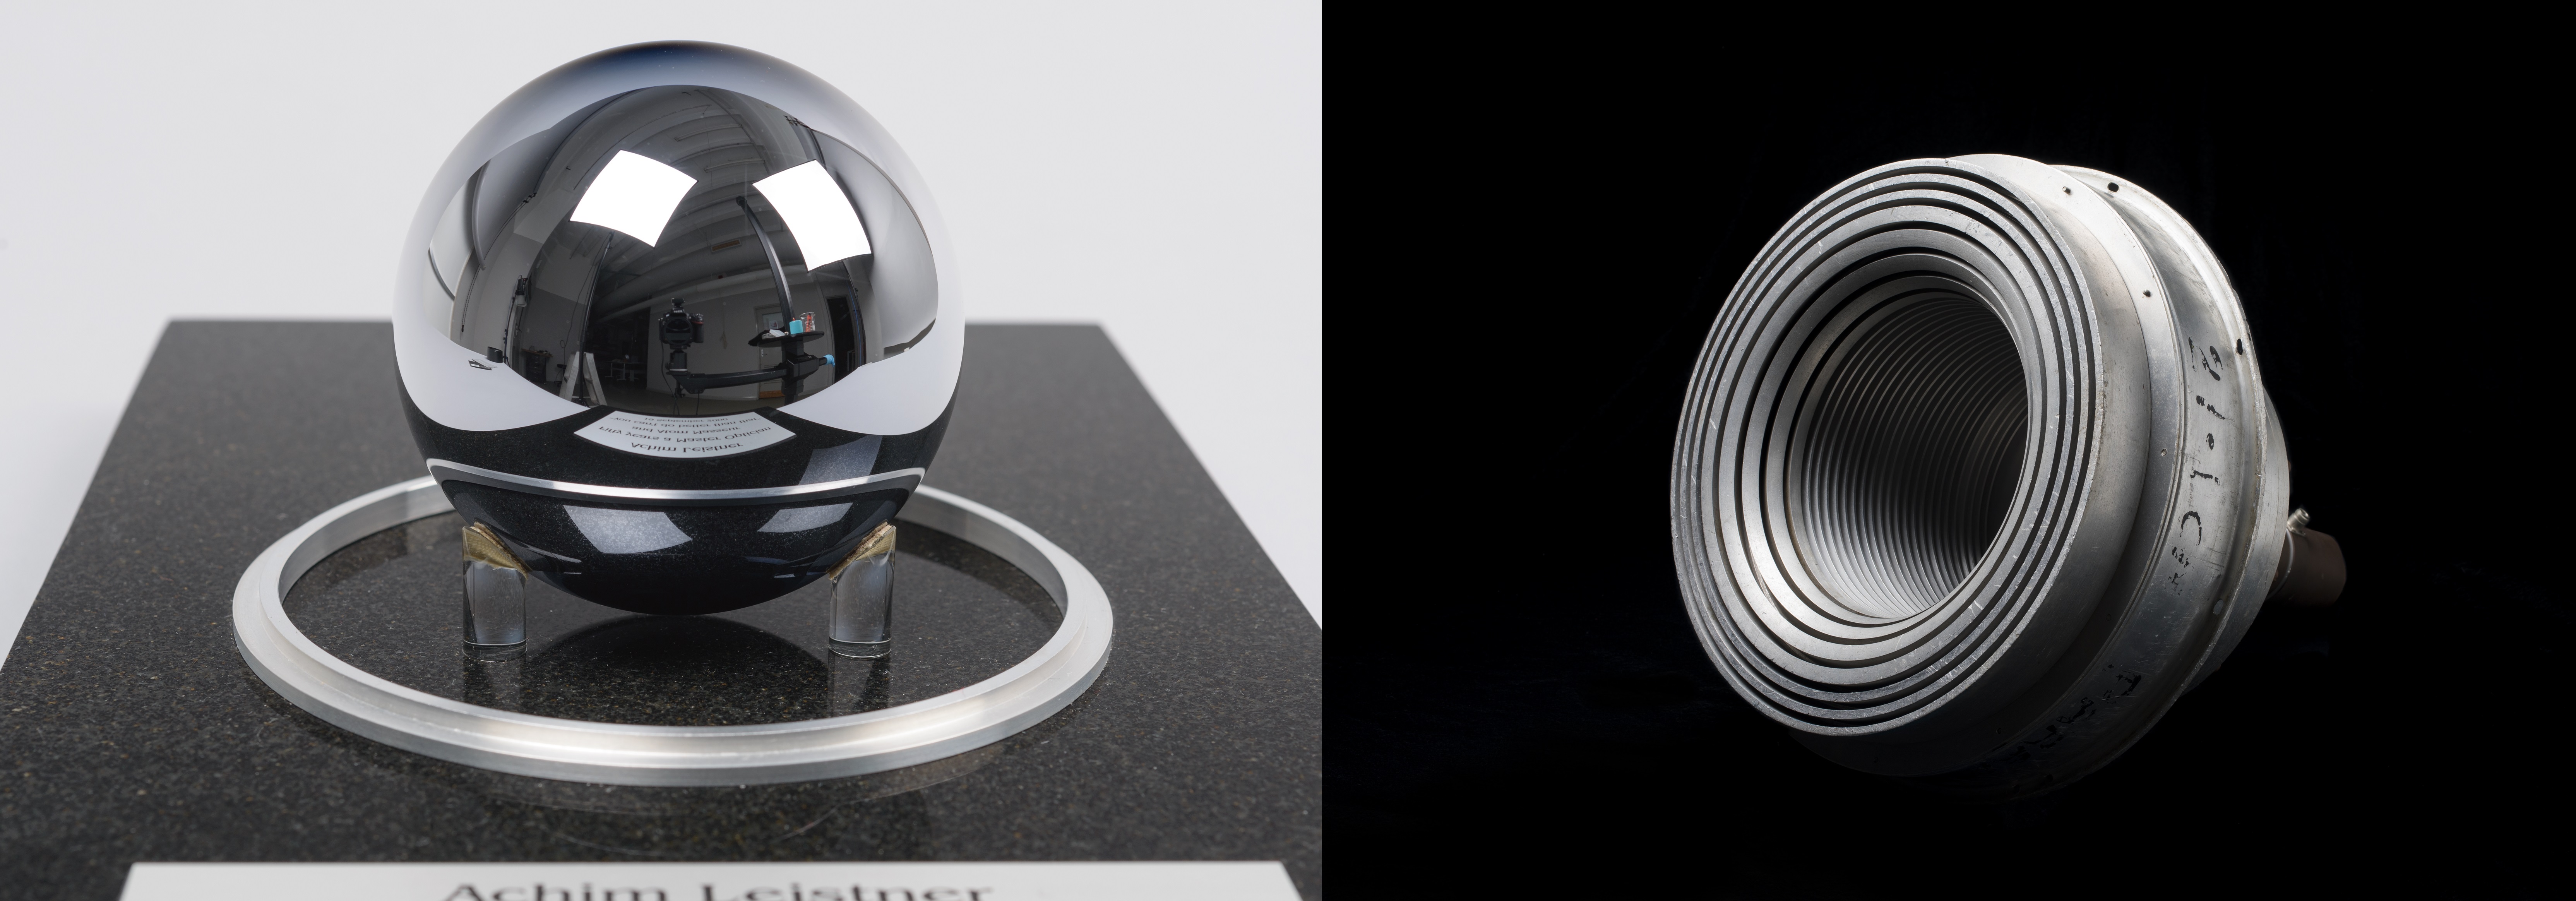 Two images side by side. Left: highly polished dark grey sphere on granite stand. Reflections of the lab in which the photograph was taken can be seen. Right: cylindrical metal device with several concentric rings of metal leading to a hollow interior.